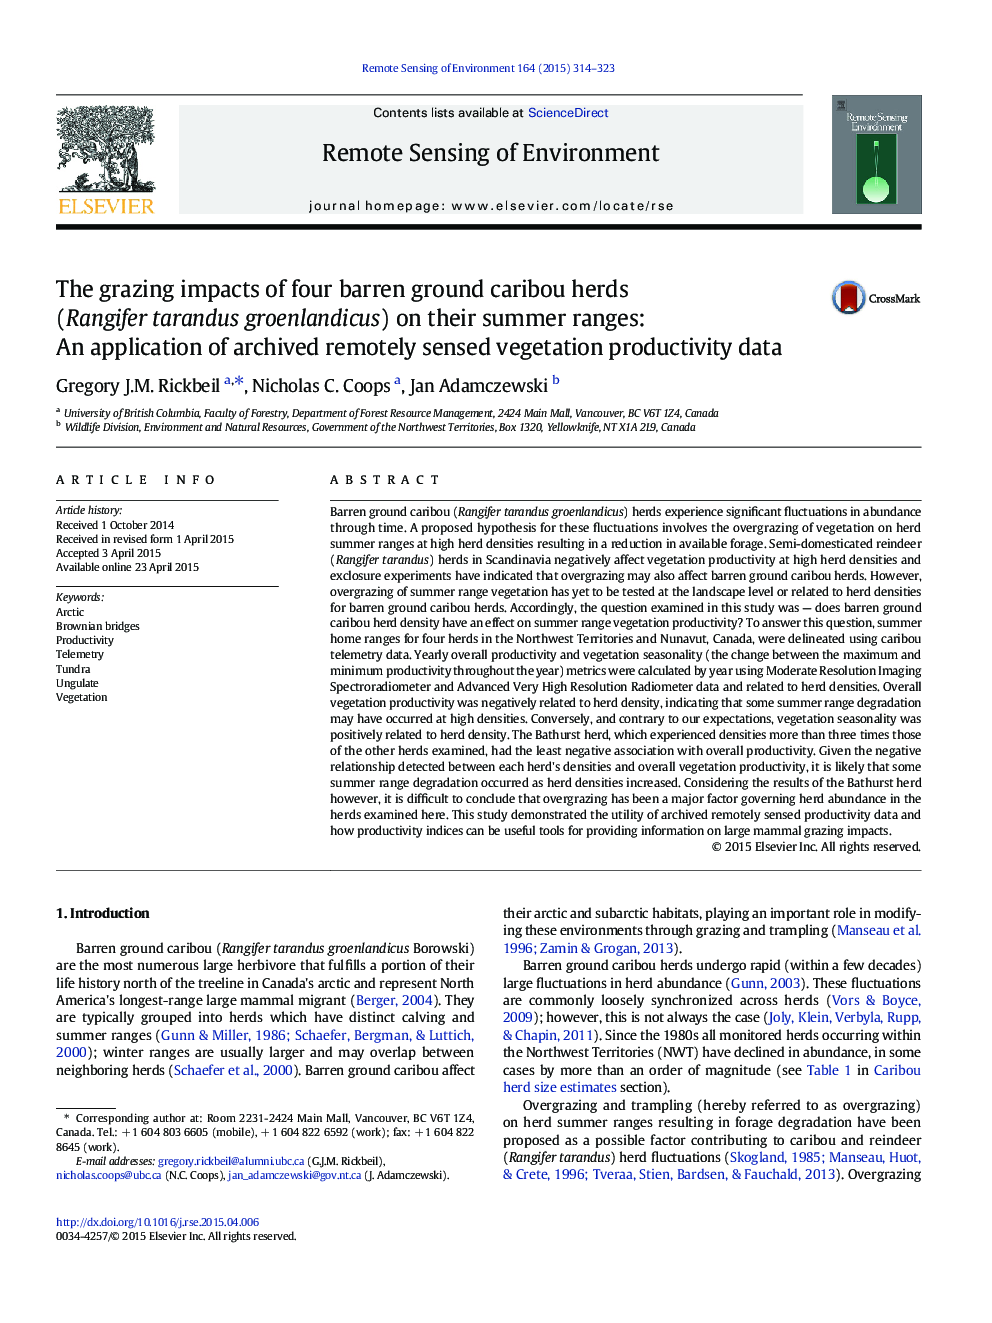 The grazing impacts of four barren ground caribou herds (Rangifer tarandus groenlandicus) on their summer ranges: An application of archived remotely sensed vegetation productivity data